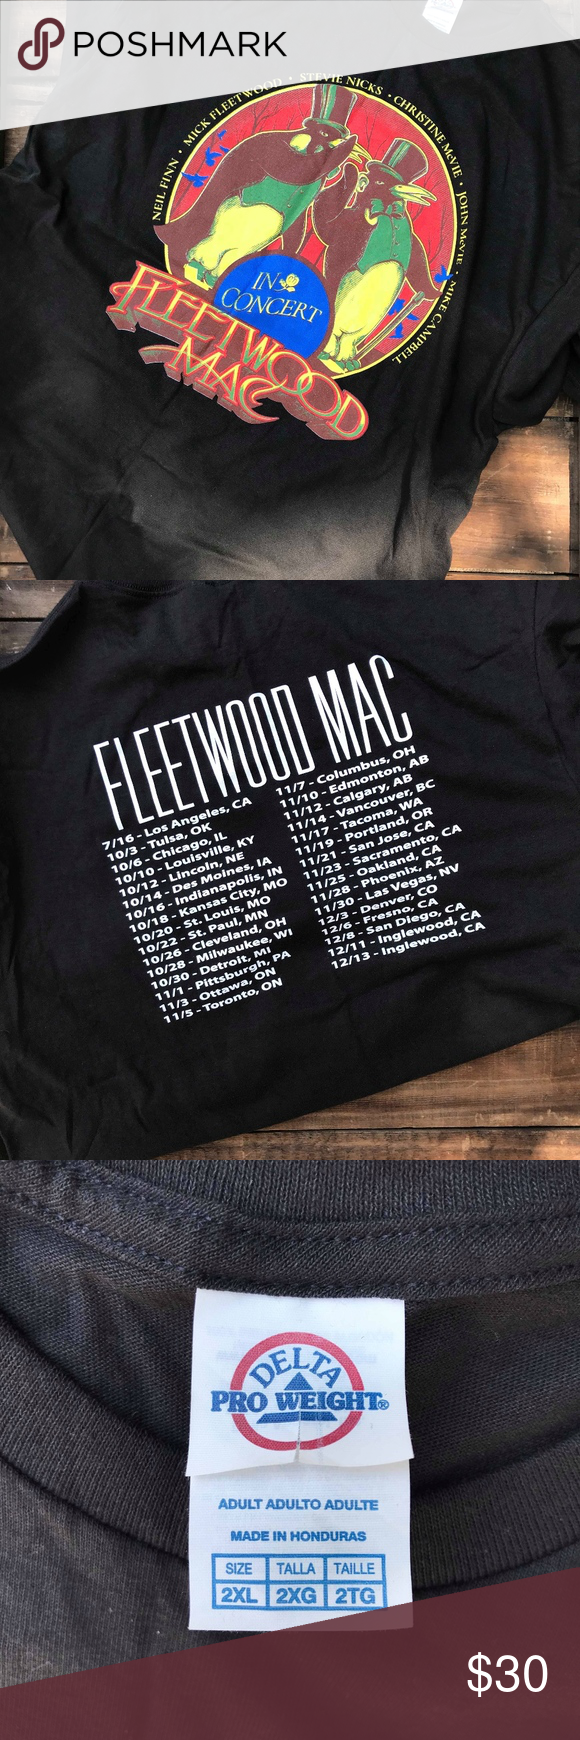 all tour dates for fleetwood mac 2018